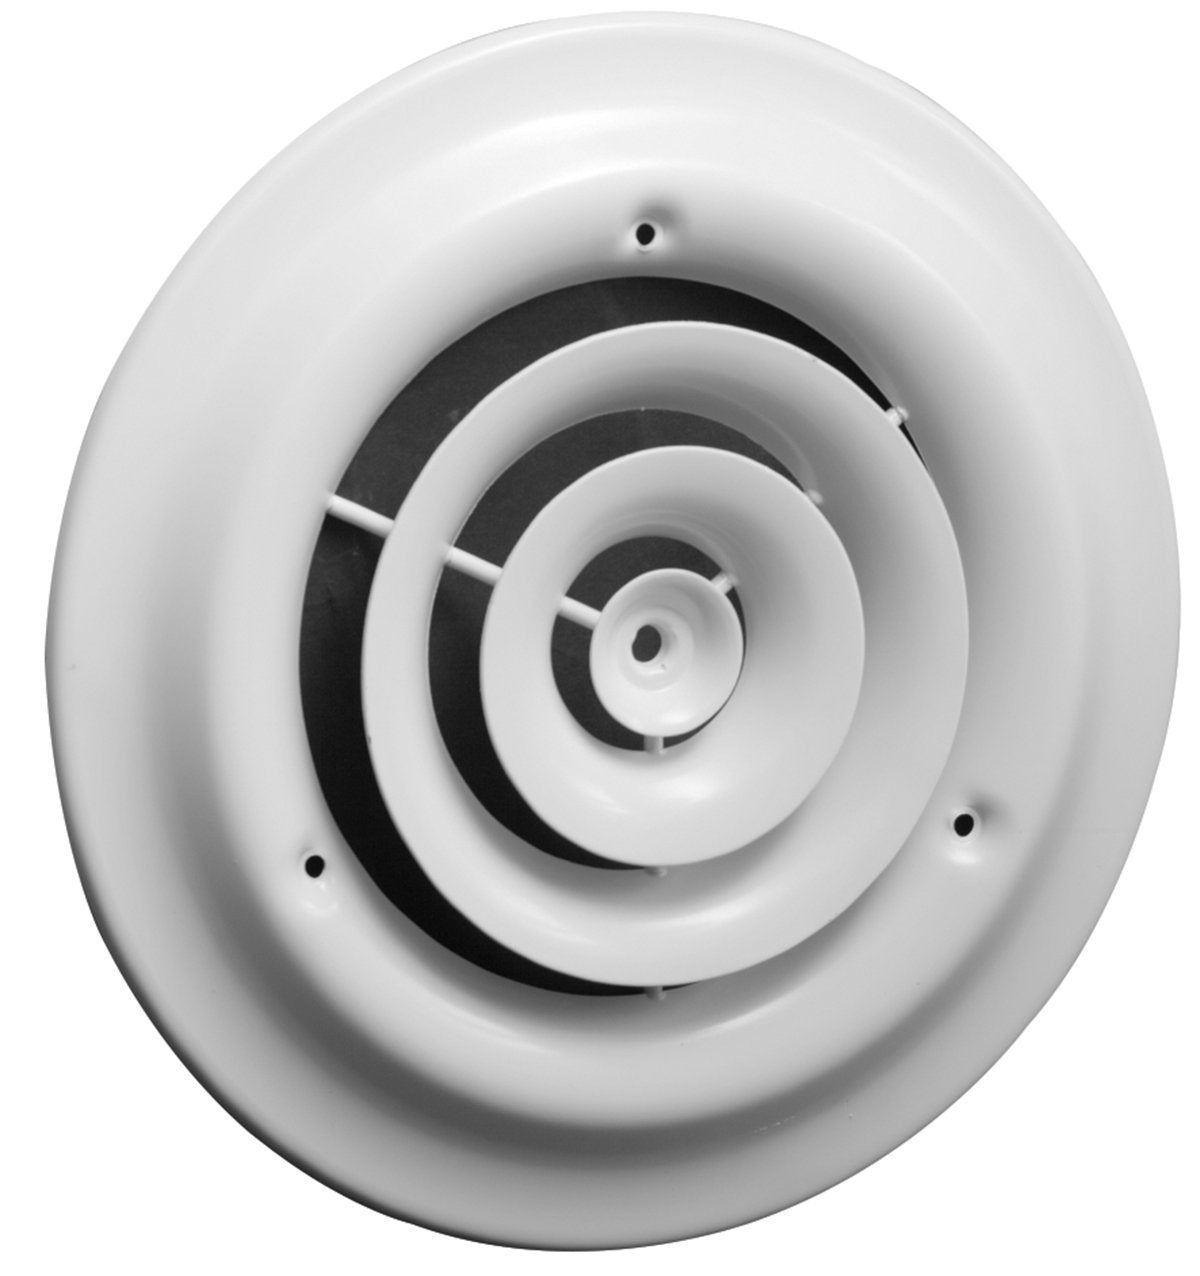 12&quot; Round Ceiling Diffuser - Easy Air Flow - HVAC Duct [White]